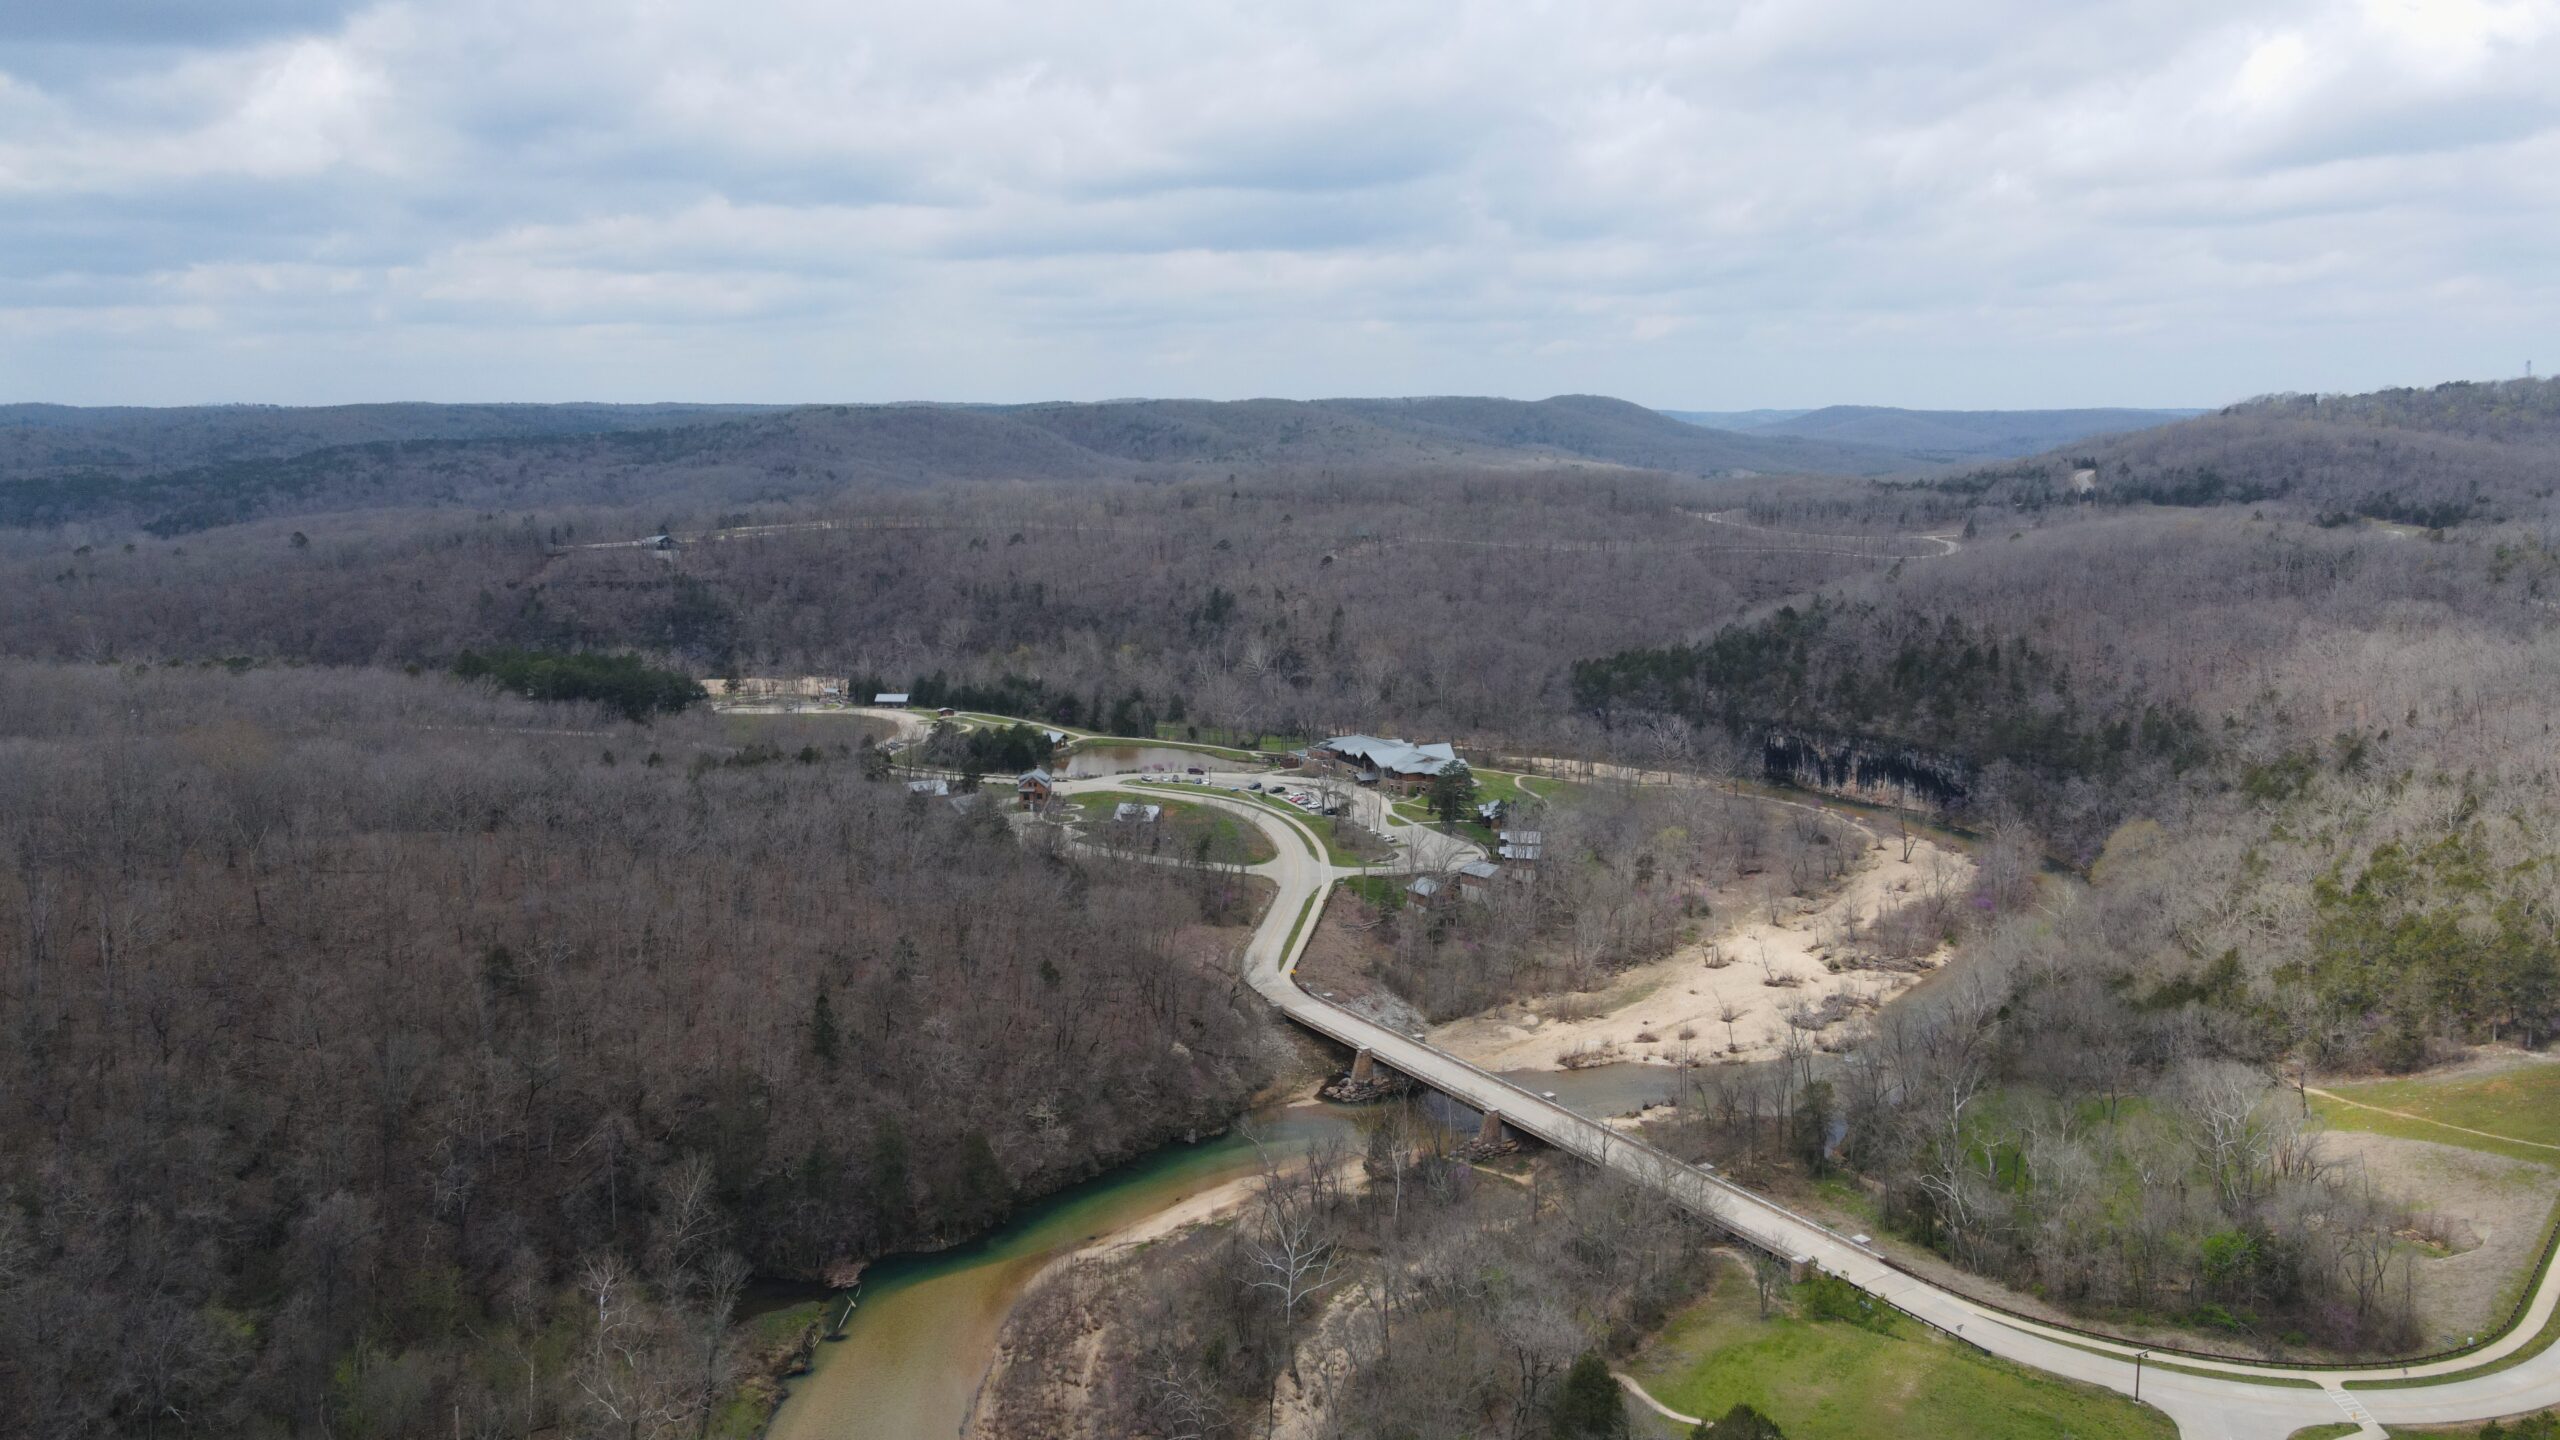 a drone picture over looking the echo bluff state park lodge, a road, bridge and green creek cutting through a forested area with hills